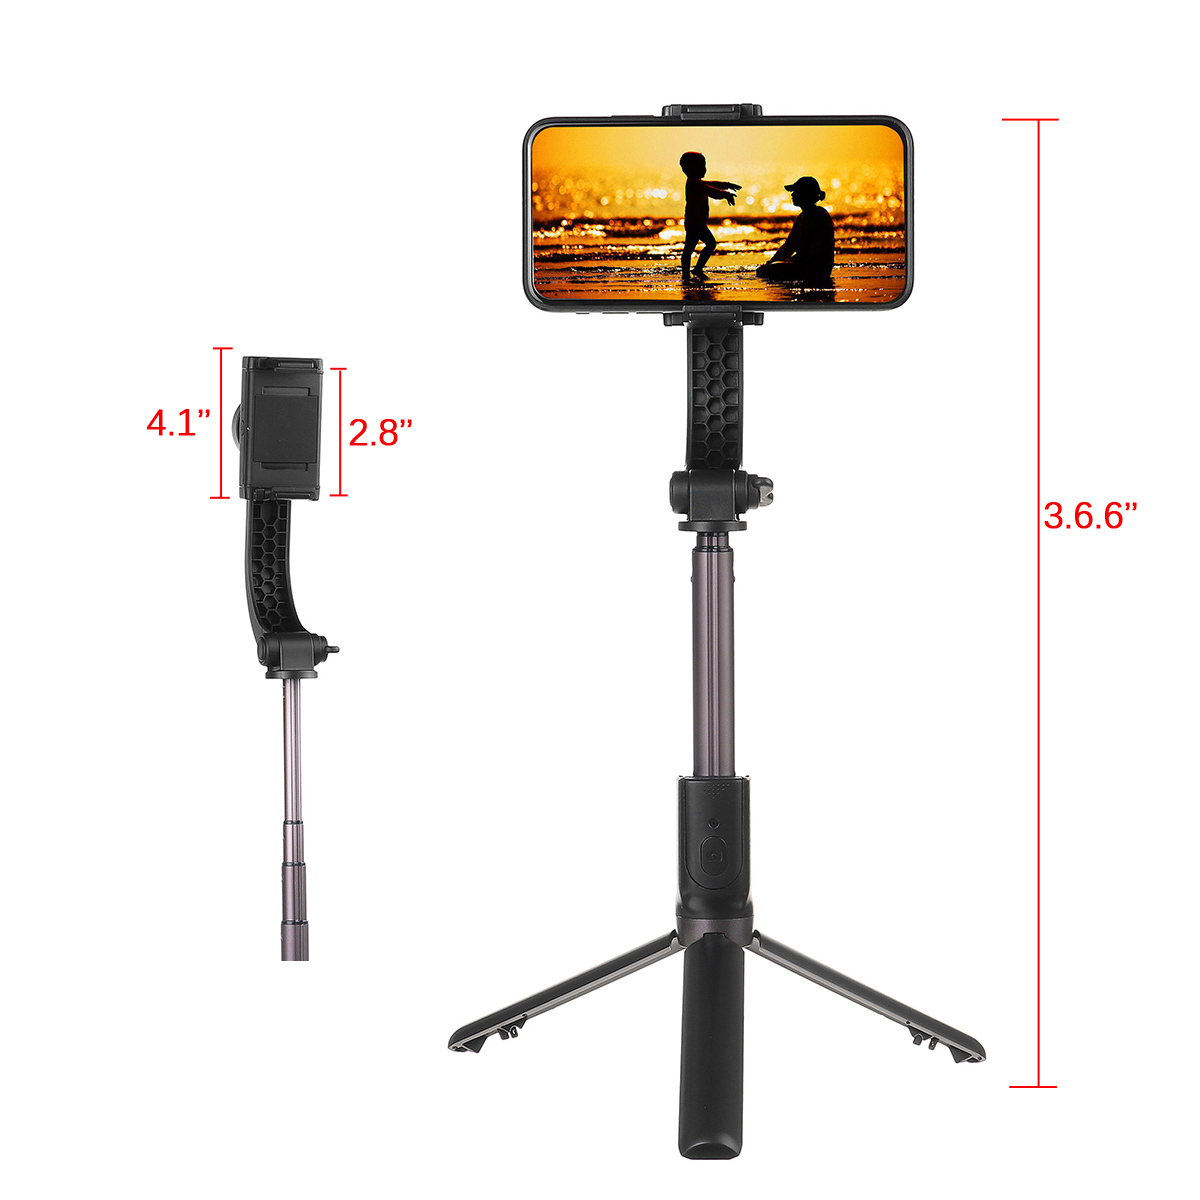 R15-Extended-Telescopic-bluetooth-Wireless-Handheld-Stabilizer-Mobile-Phone-Holder-Stand-for-Outdoor-1822120-8